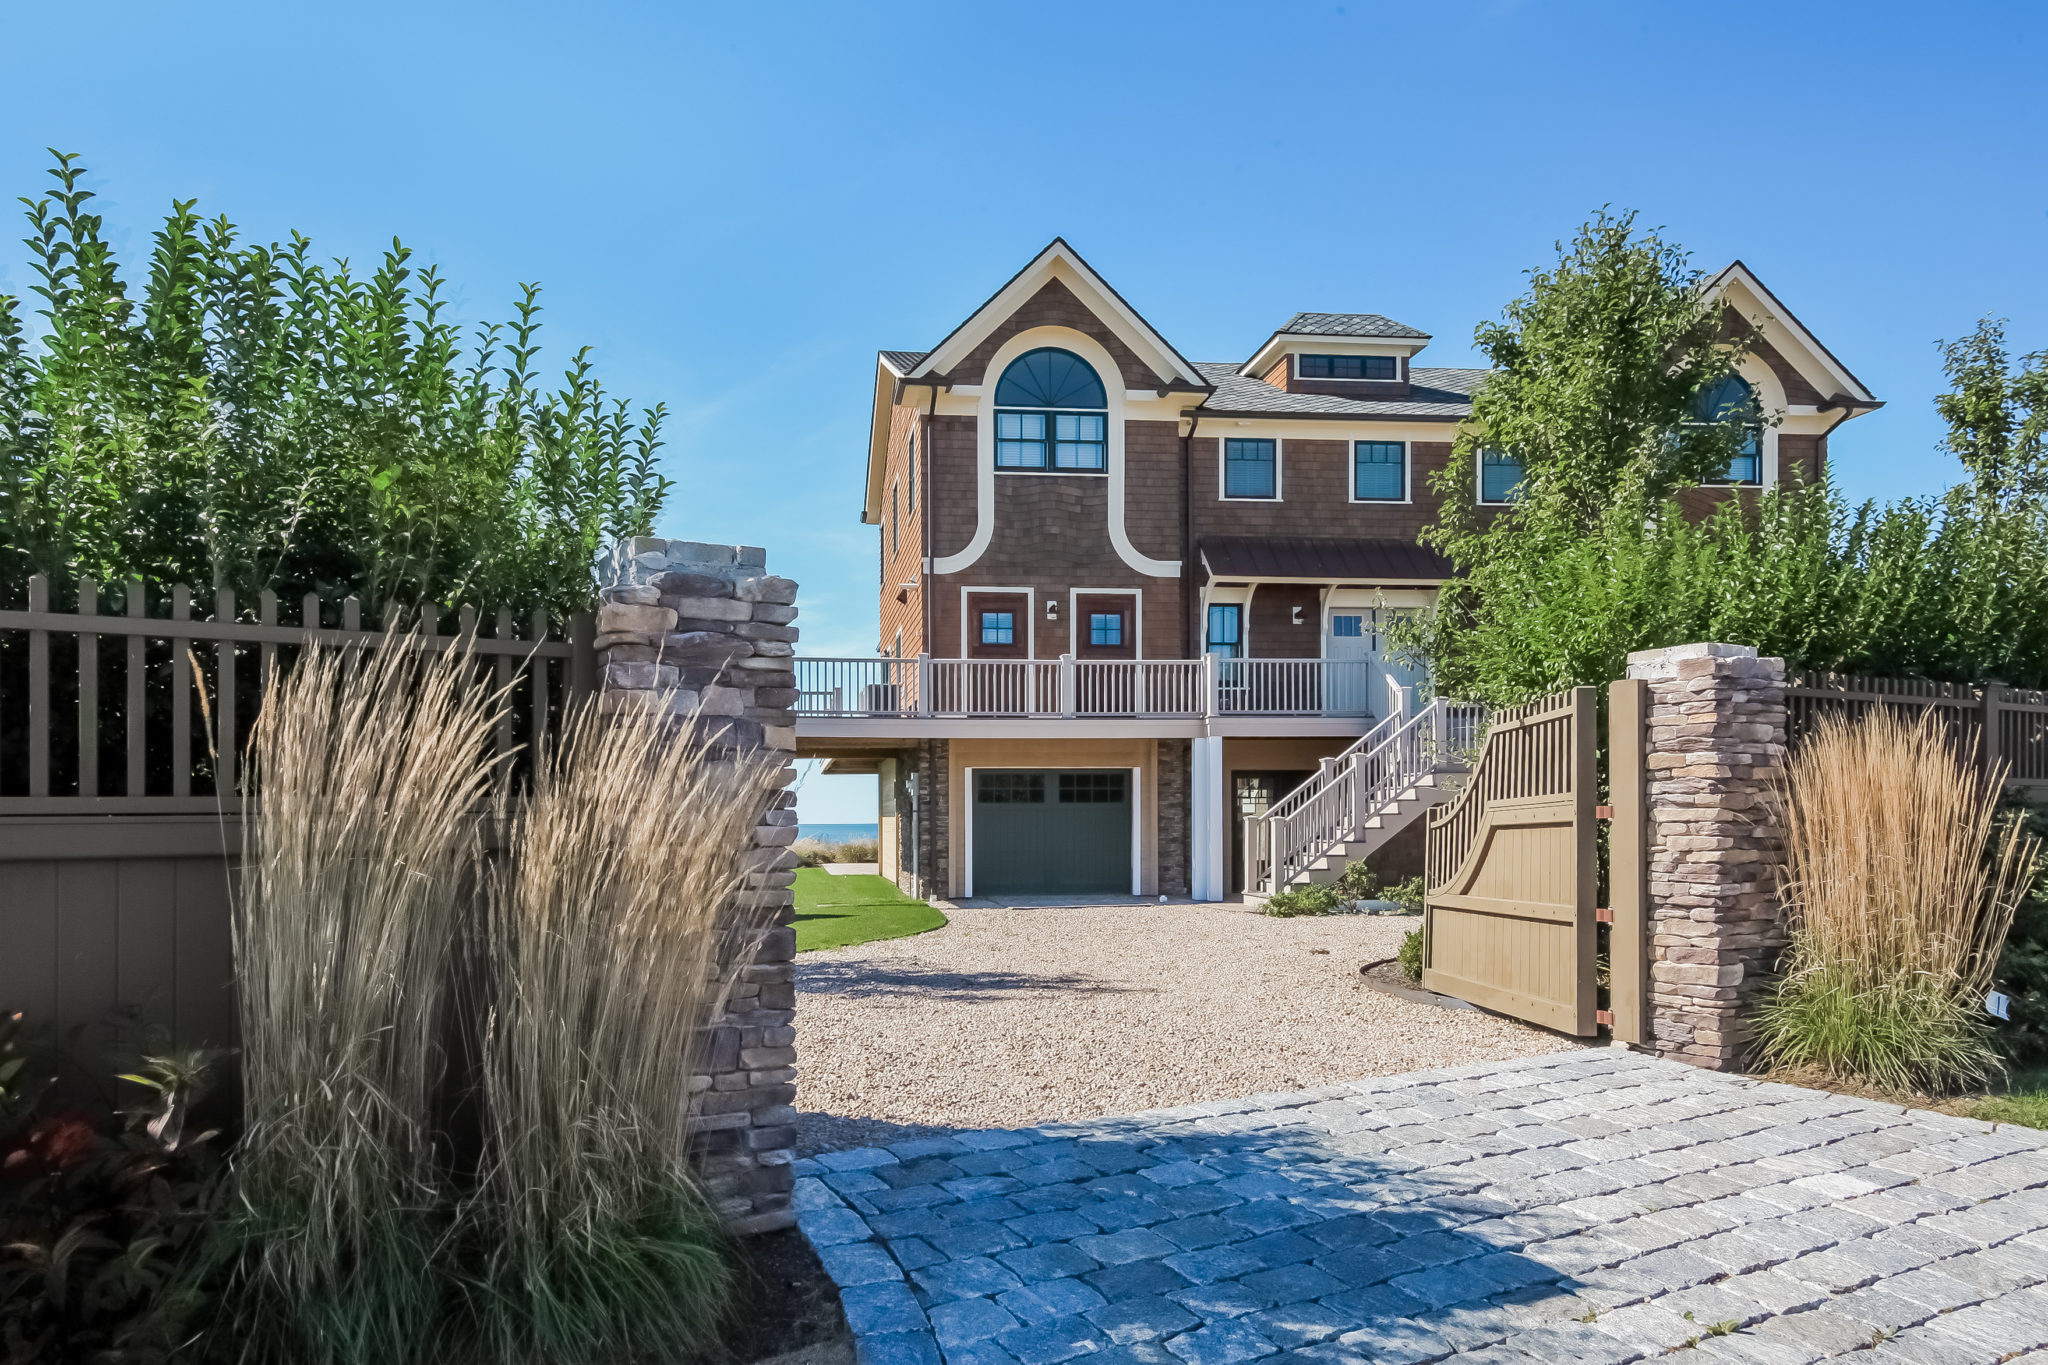 A newly constructed, oceanfront house in Narragansett has sold for $2.7 million./CREDIT LILA DELMAN REAL ESTATE INTERNATIONAL.